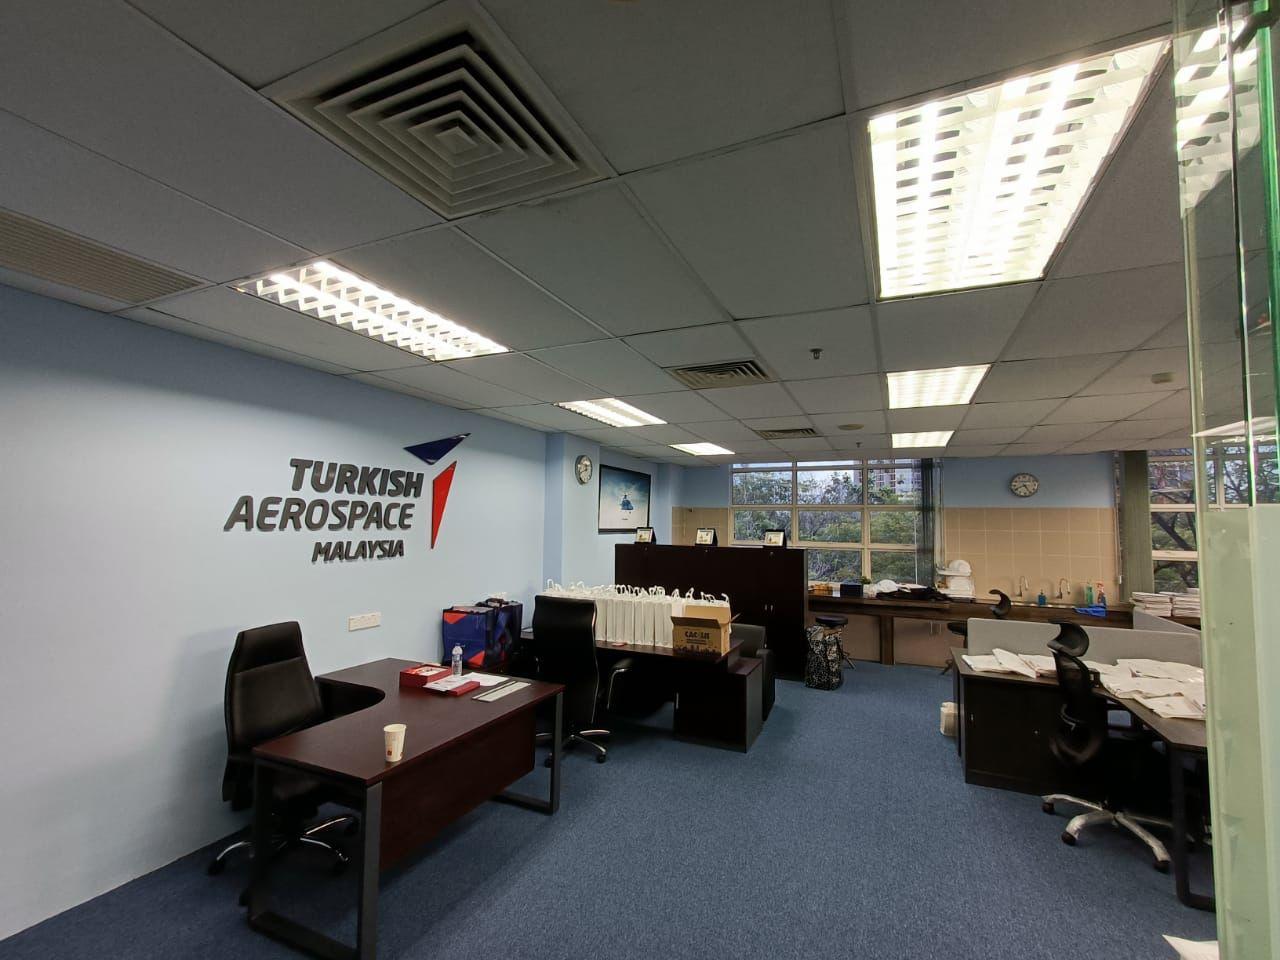 Turkish Aerospace first engineering and design office in Southeast Asia at the Cyberview Futurise campus in Selangor, Malaysia is now open.